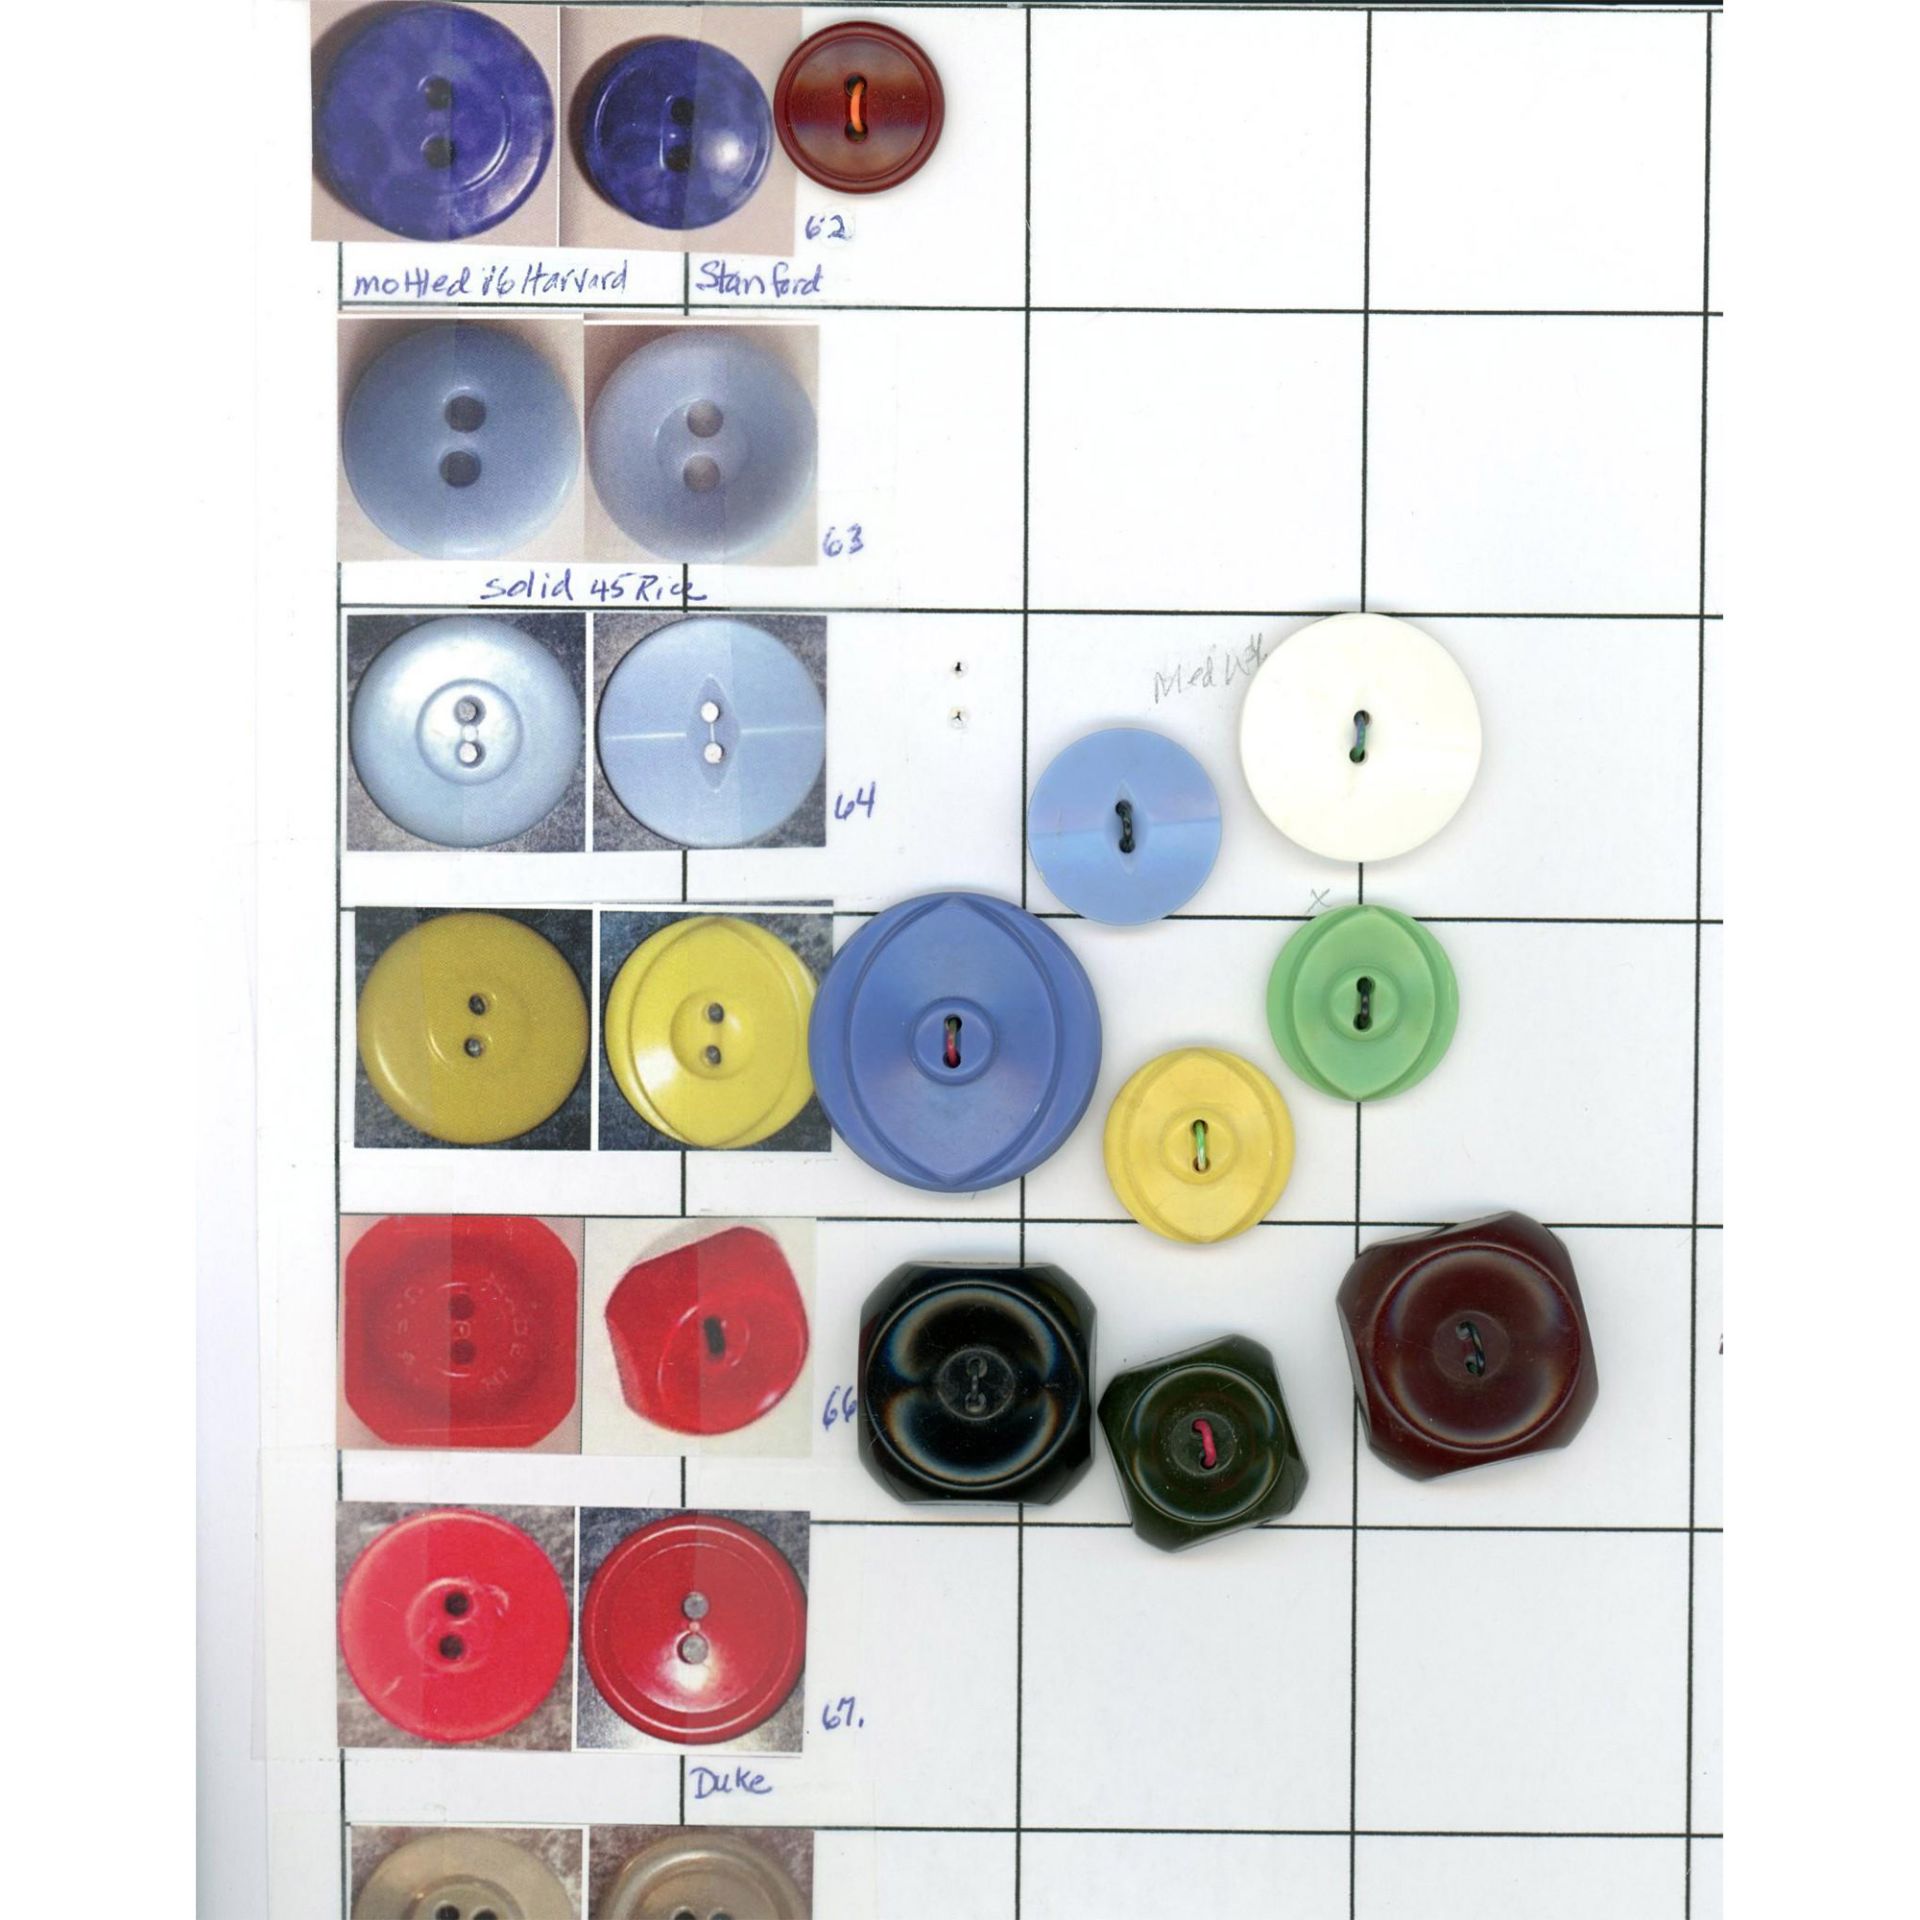 10 Cards of Division Three Colorful Plastic Buttons - Image 5 of 10